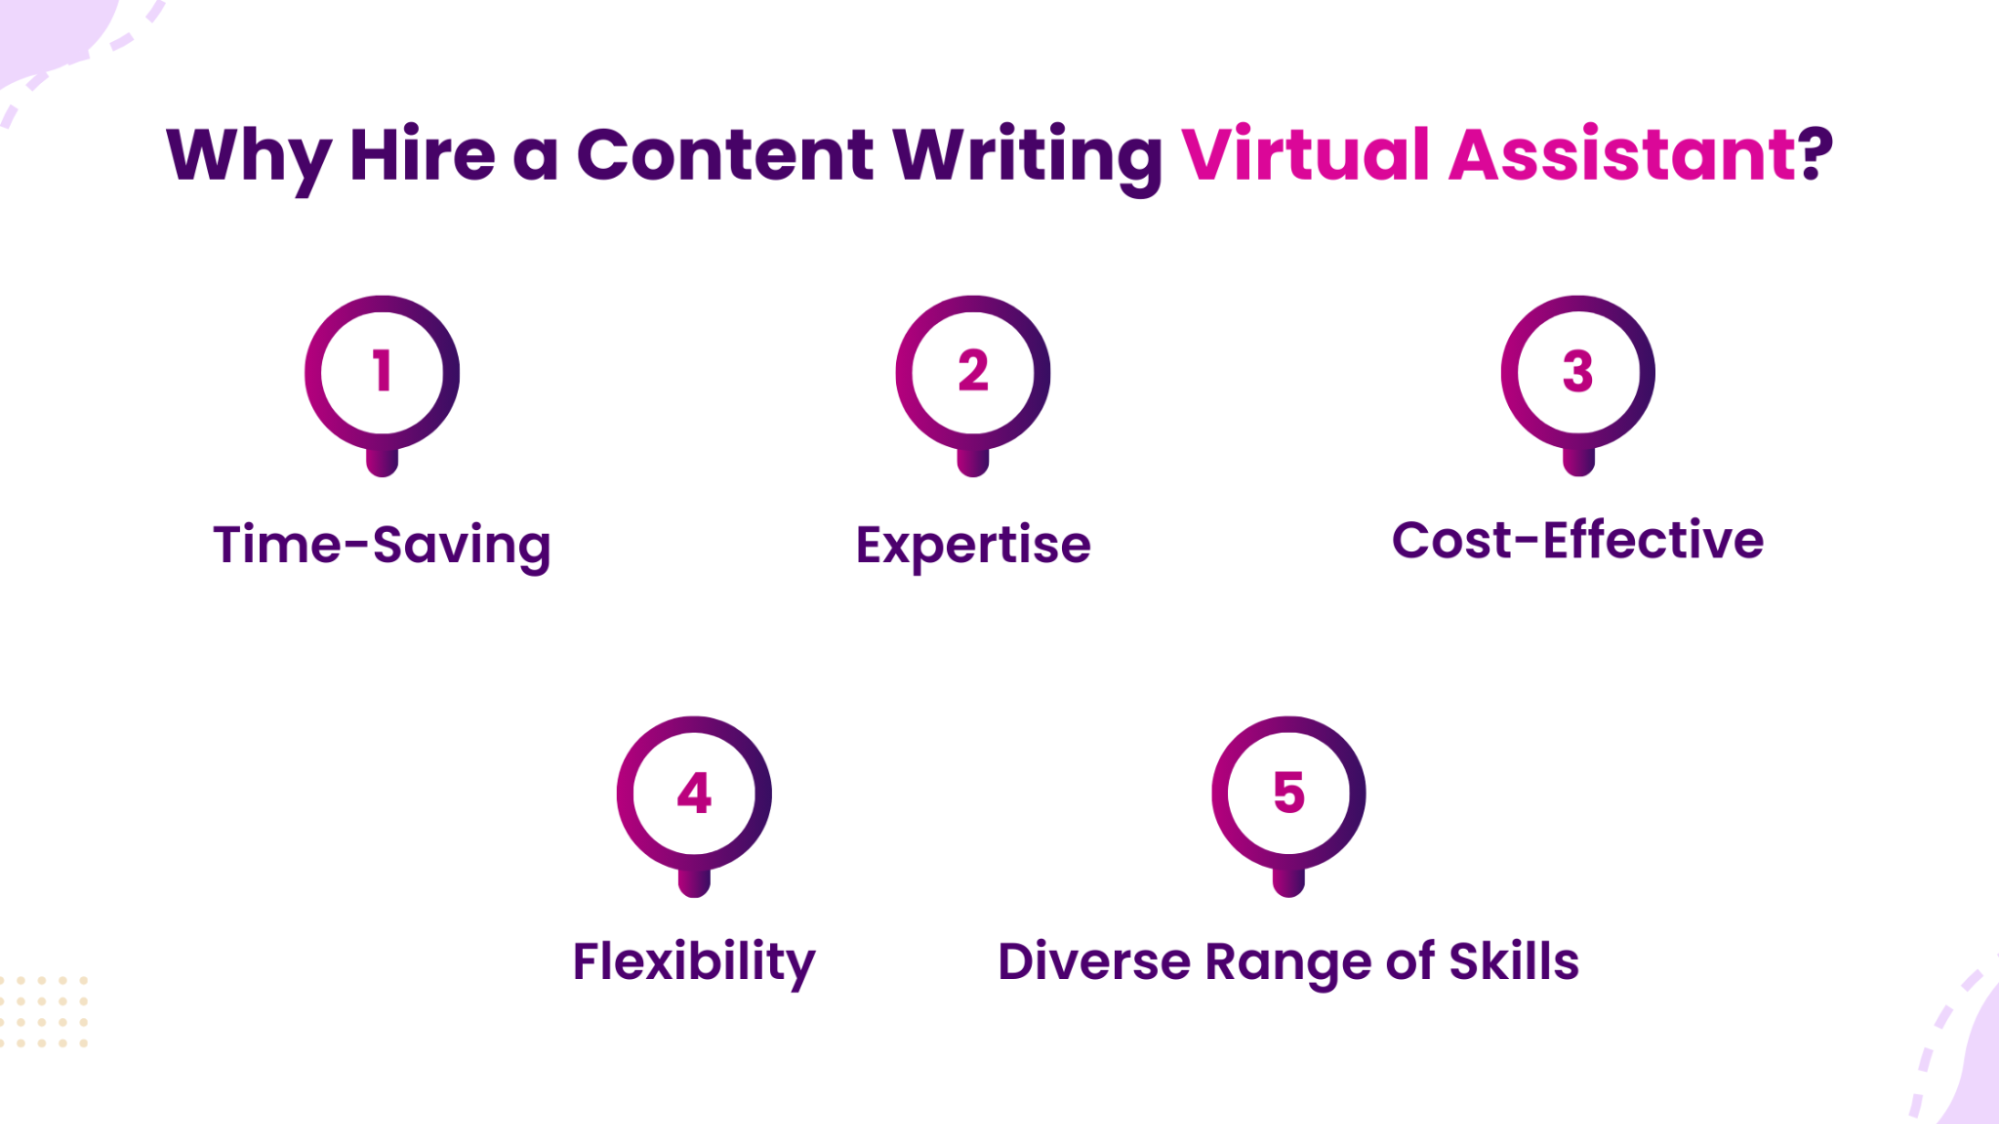 Why hire a content writing virtual assistant